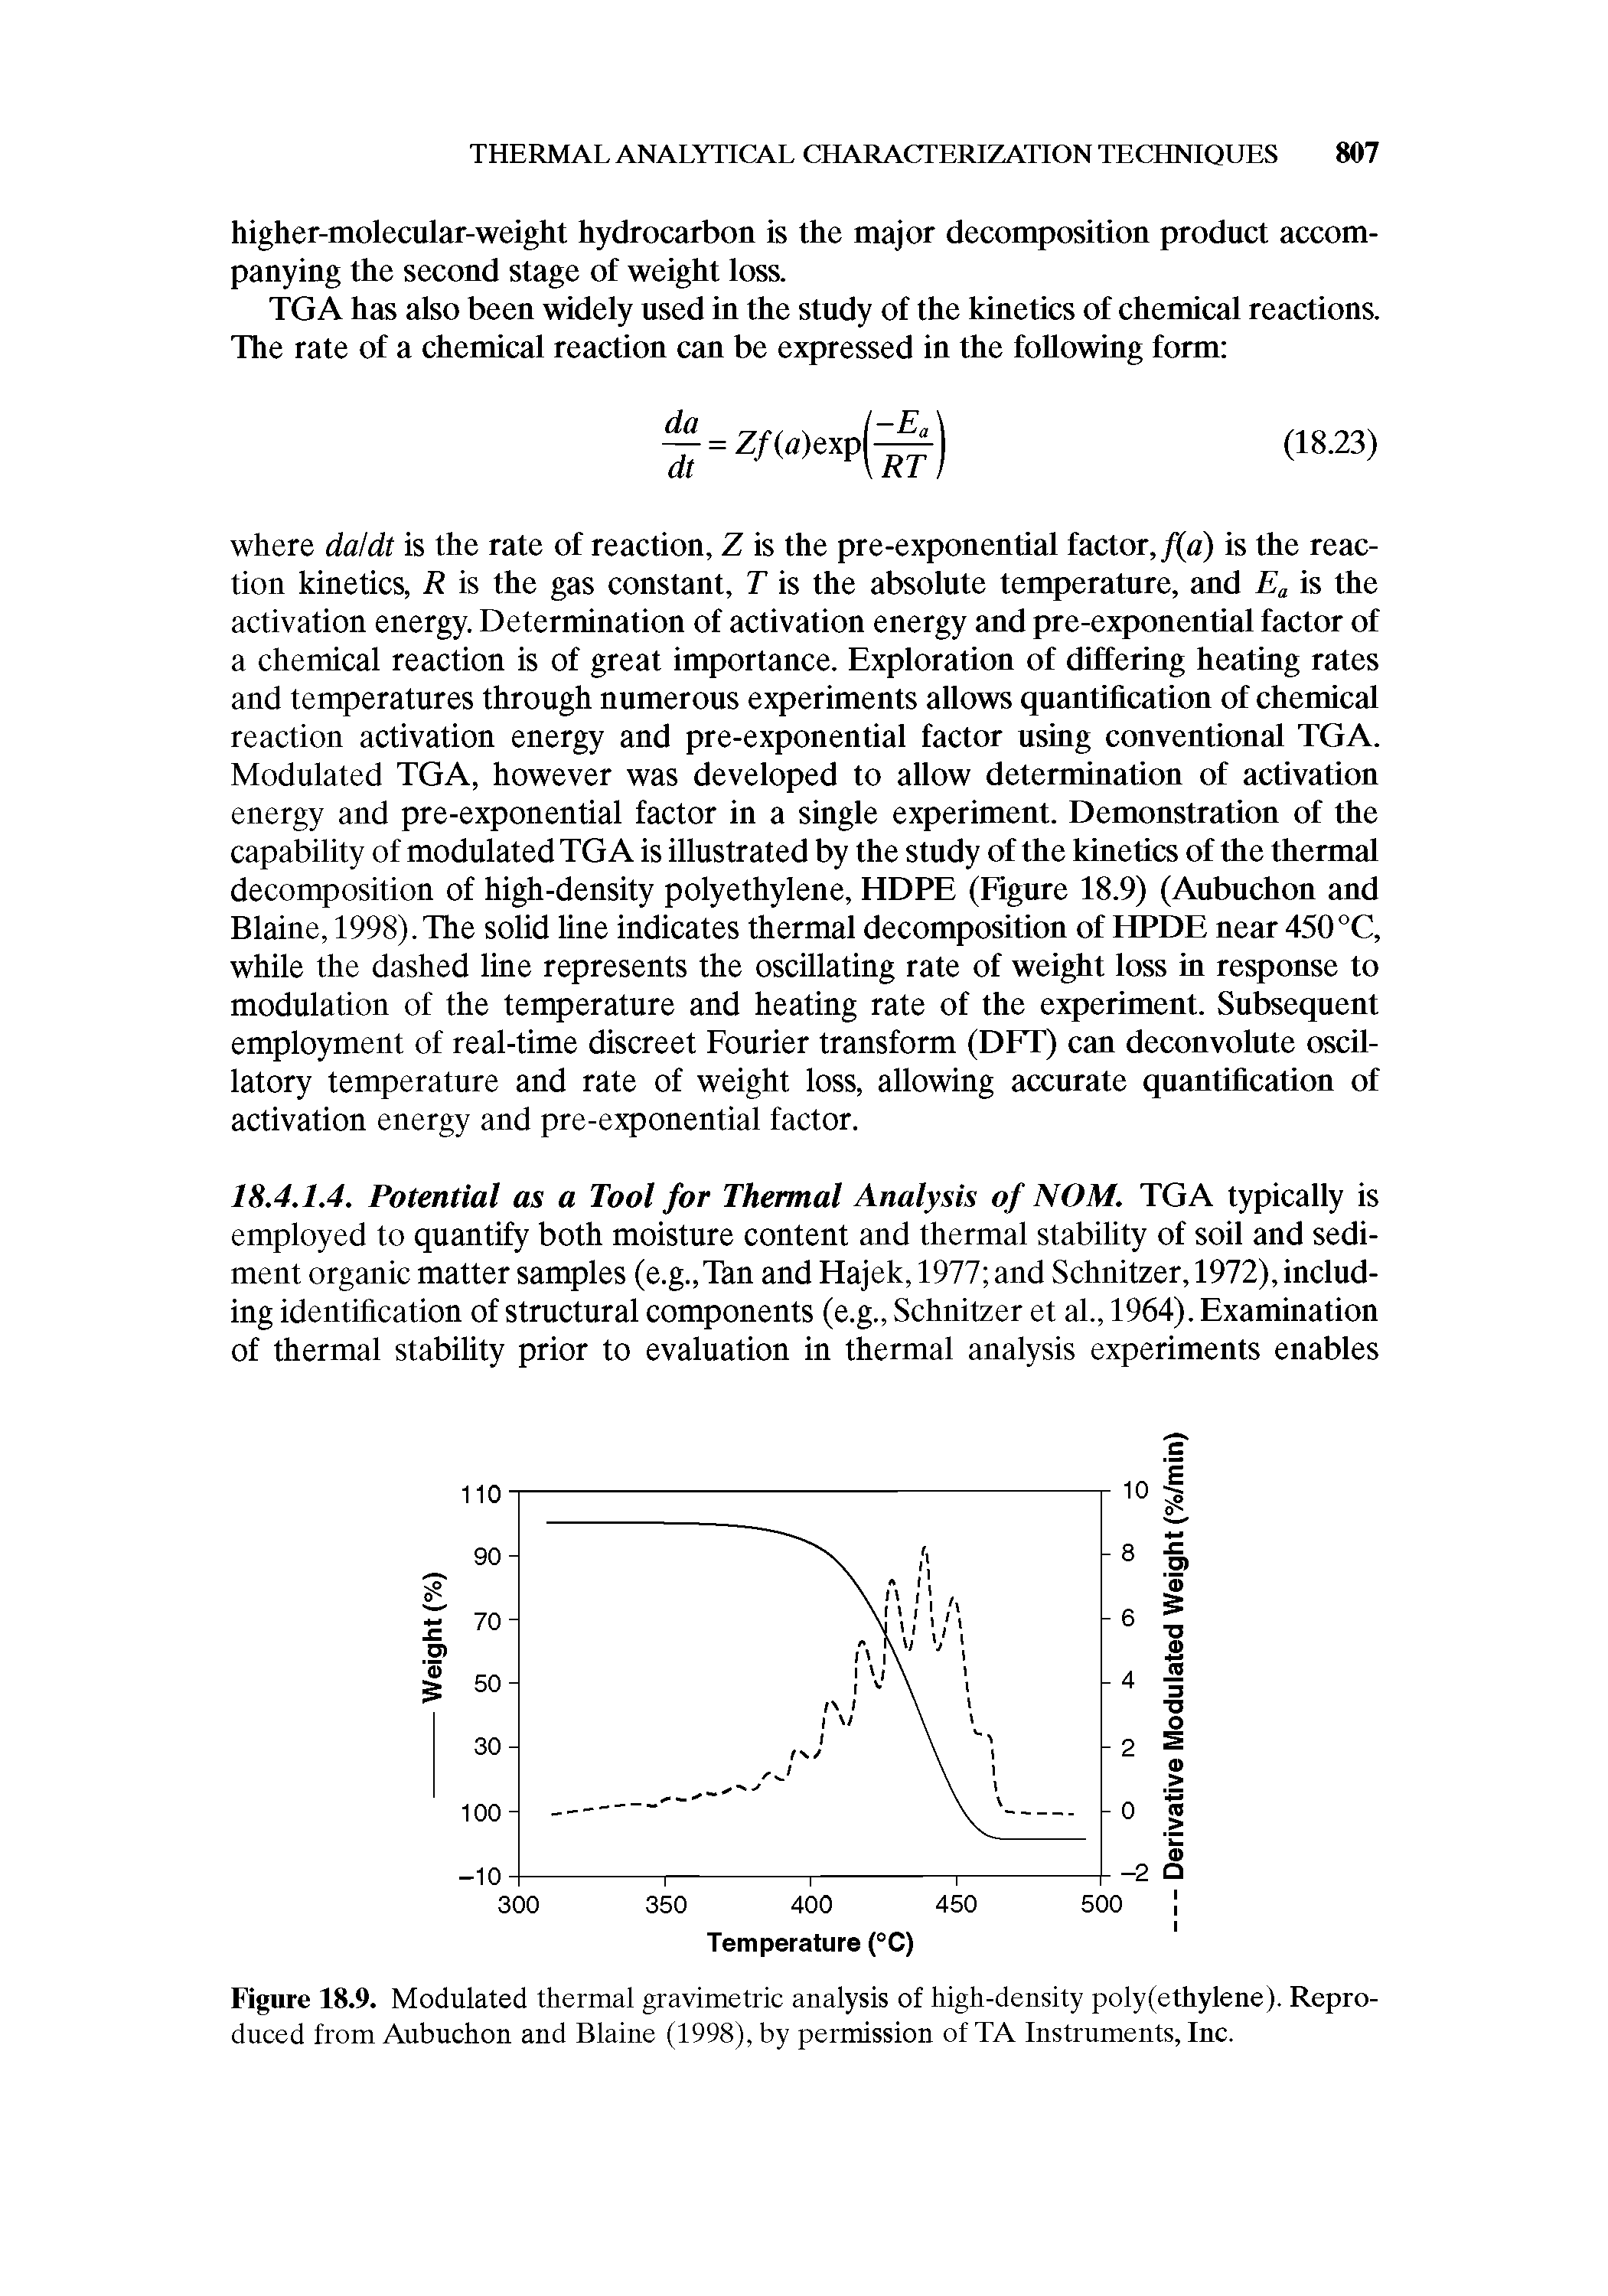 Figure 18.9. Modulated thermal gravimetric analysis of high-density poly(ethylene). Reproduced from Aubuchon and Blaine (1998), by permission of TA Instruments, Inc.